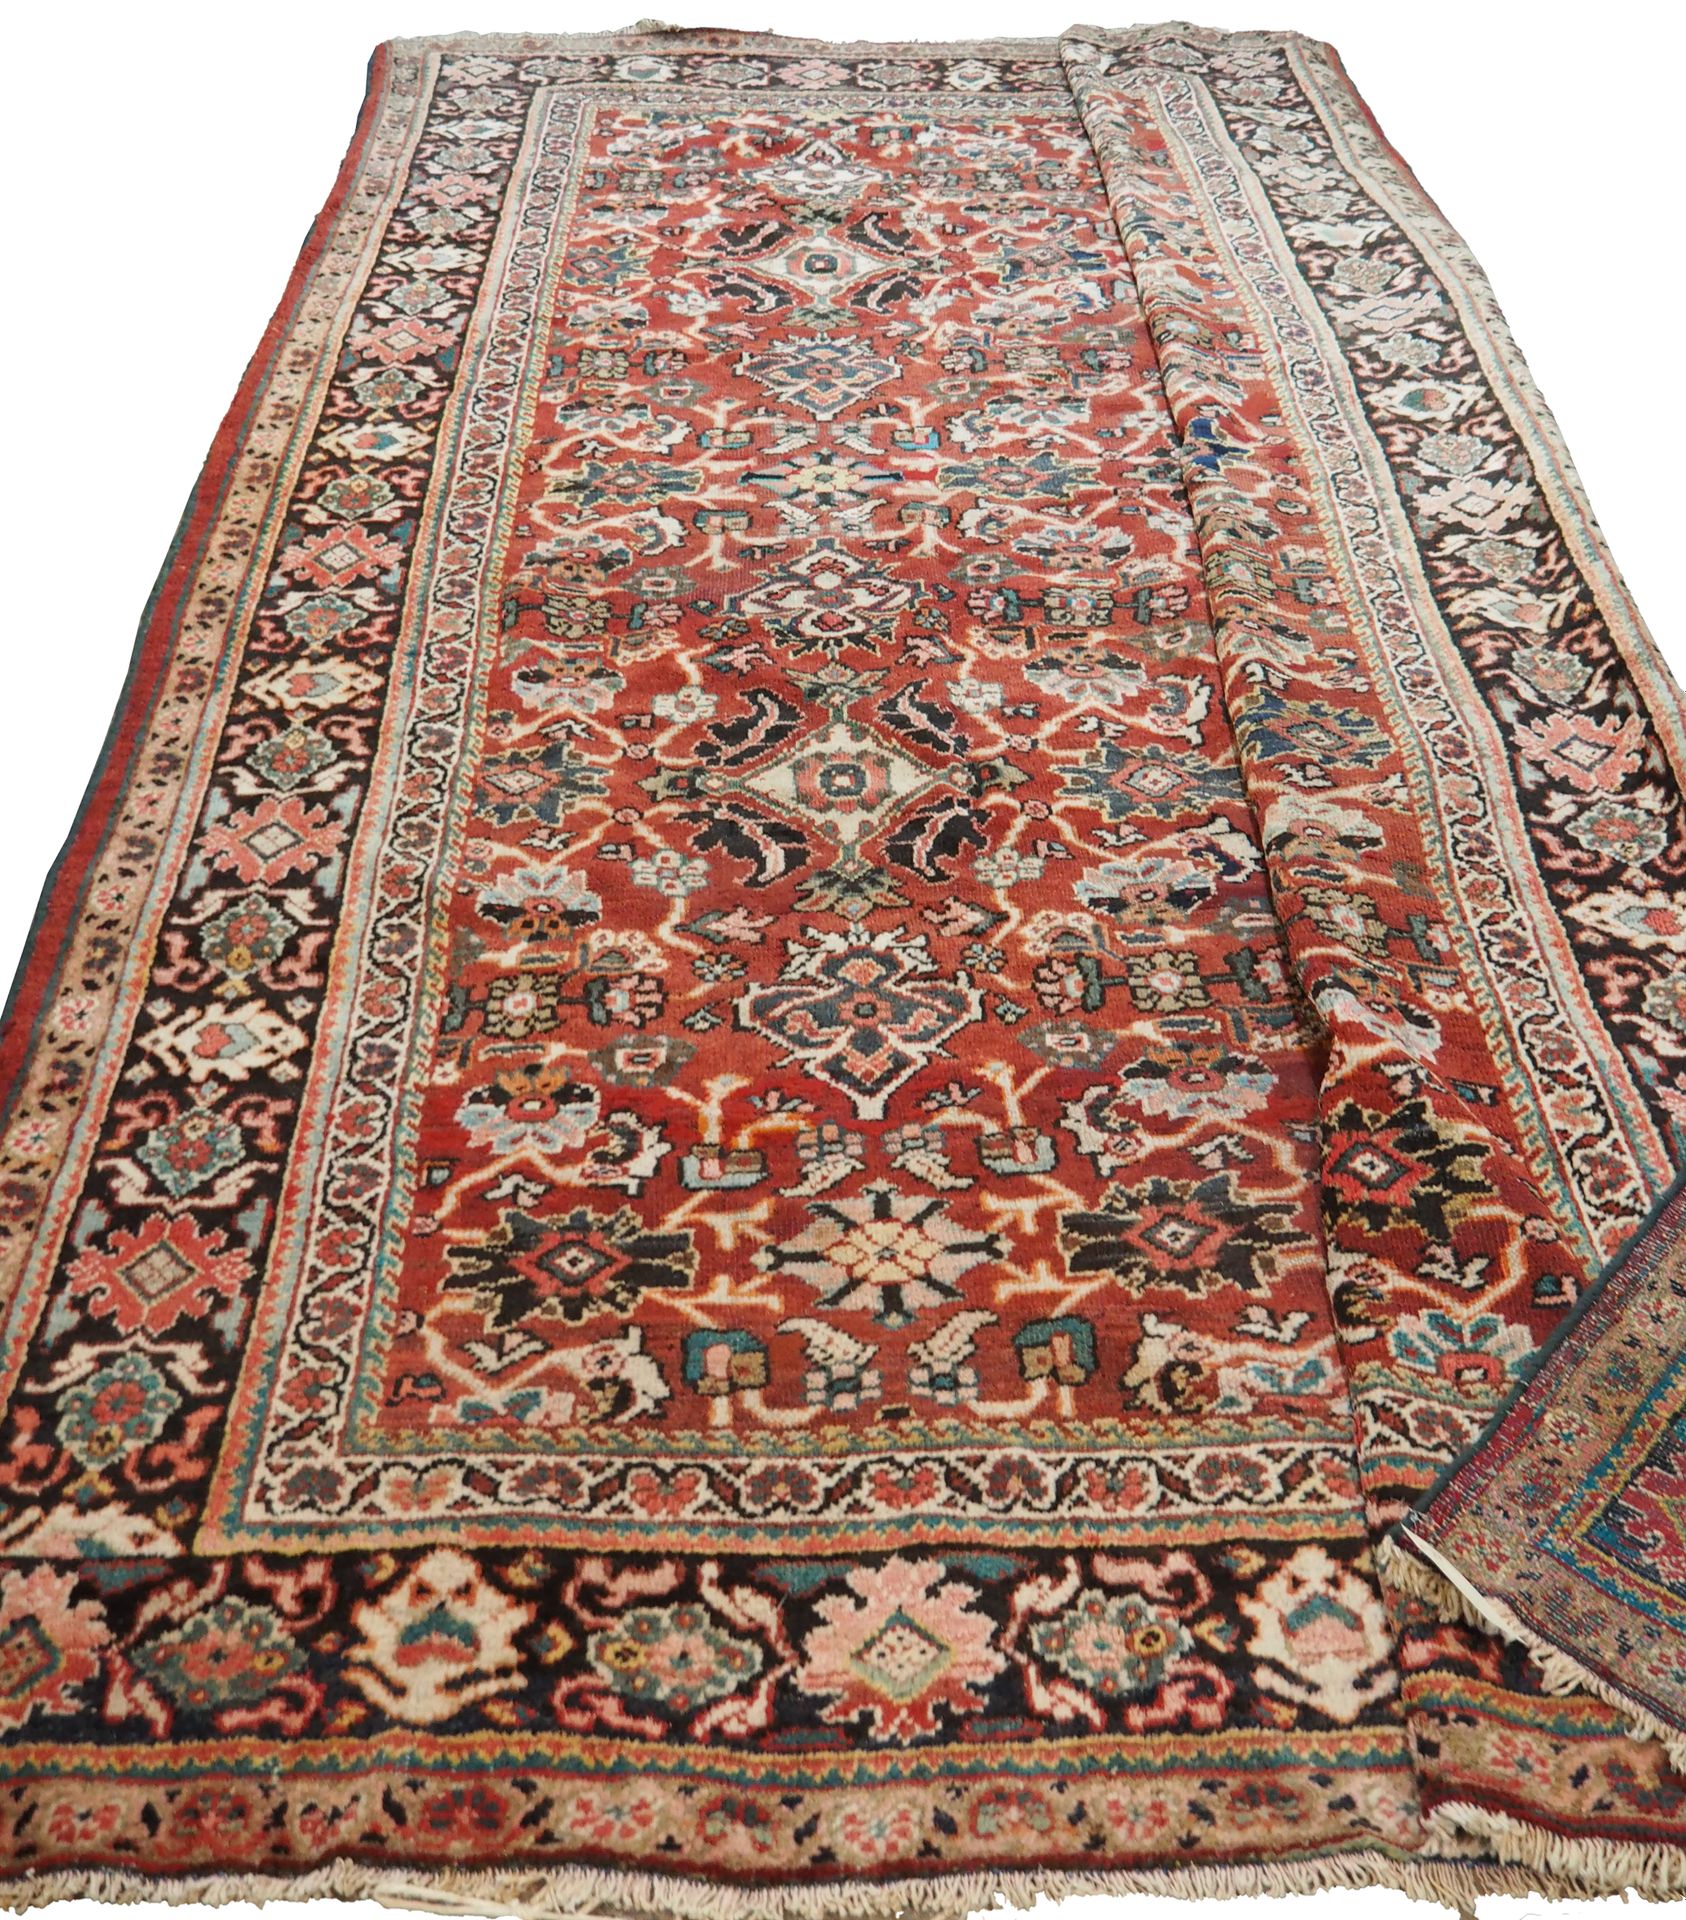 Null Important Mahal mouchkabad - Iran

Vers 1930/40

Dimensions : 420 x 320 cm
&hellip;